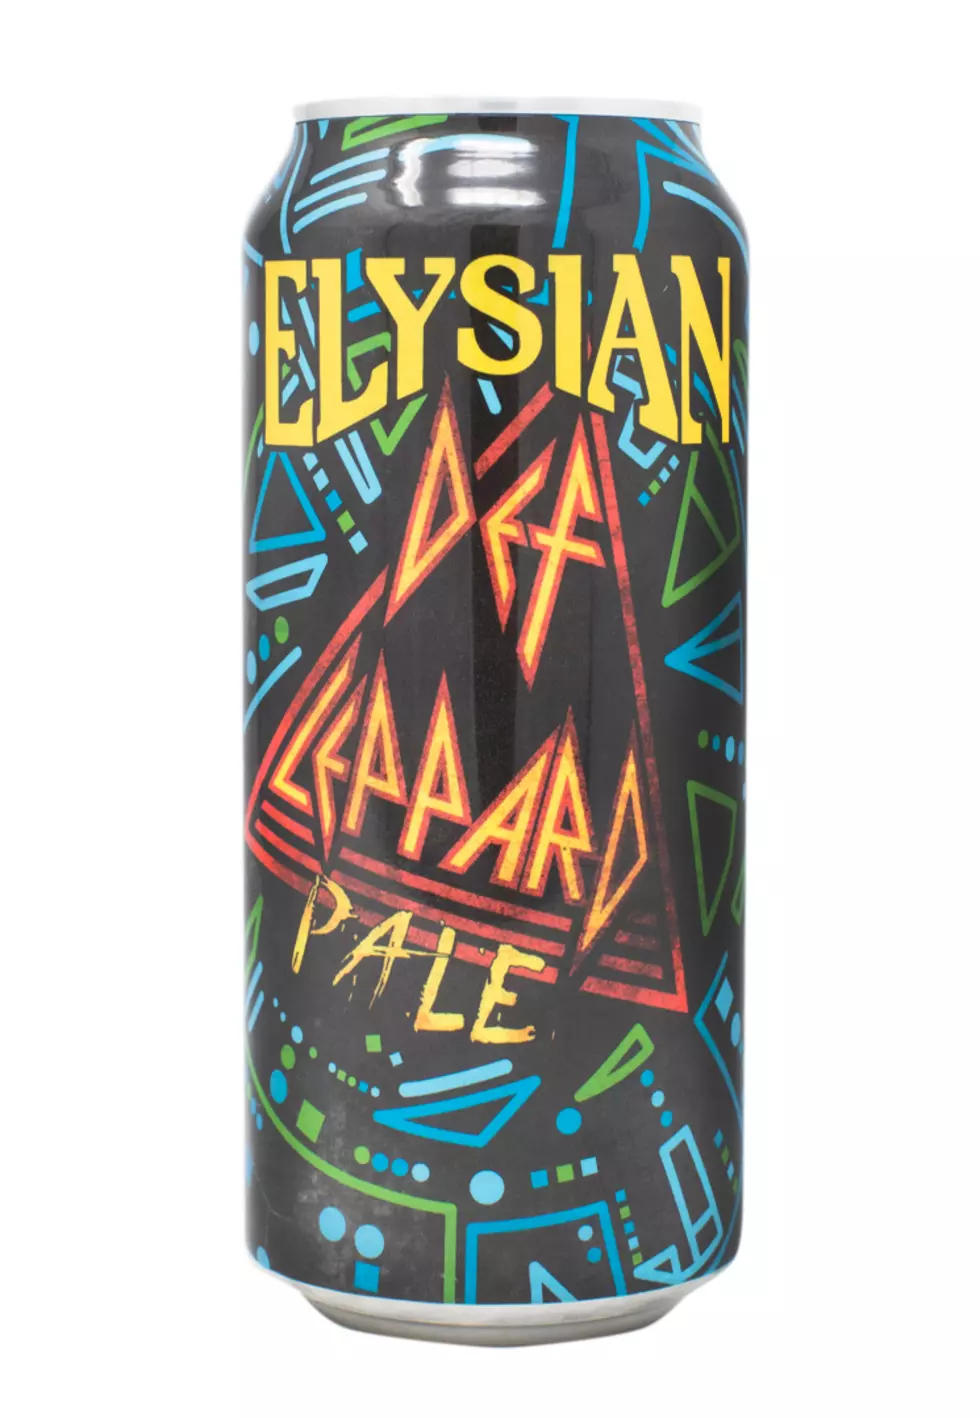 Def Leppard is Getting into the Beer Business – No F-F-F-Foolin